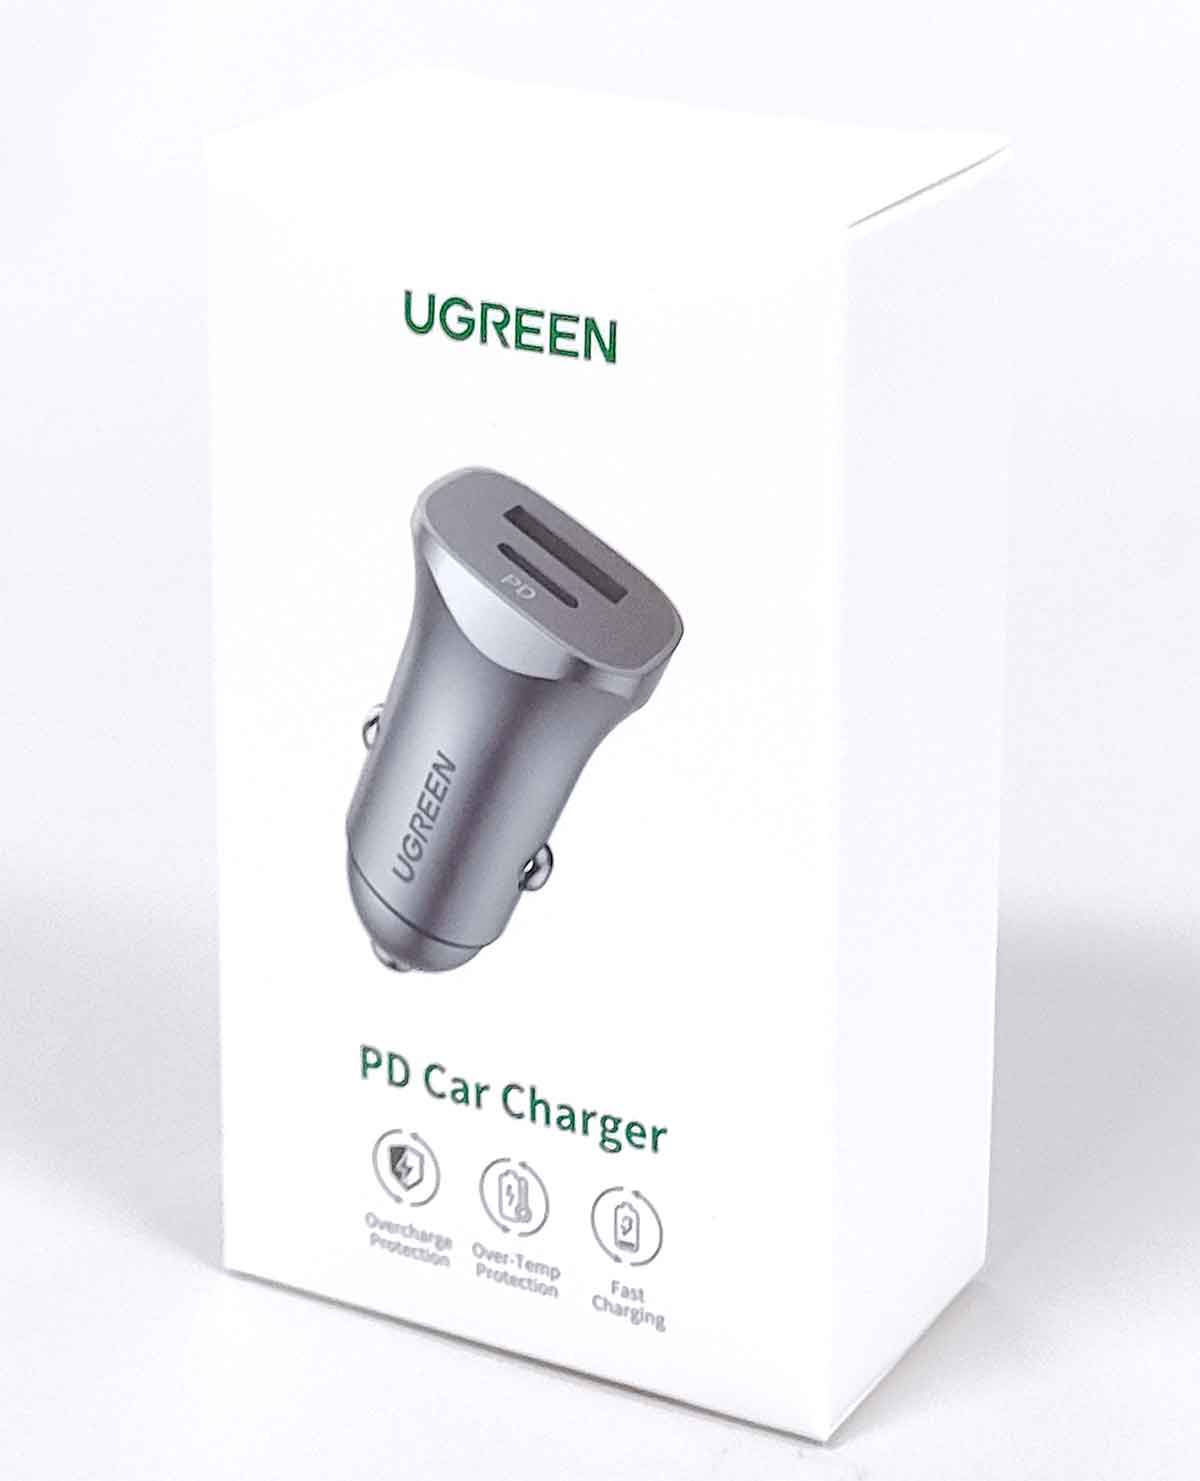 UGREEN「PD Car Charger」1